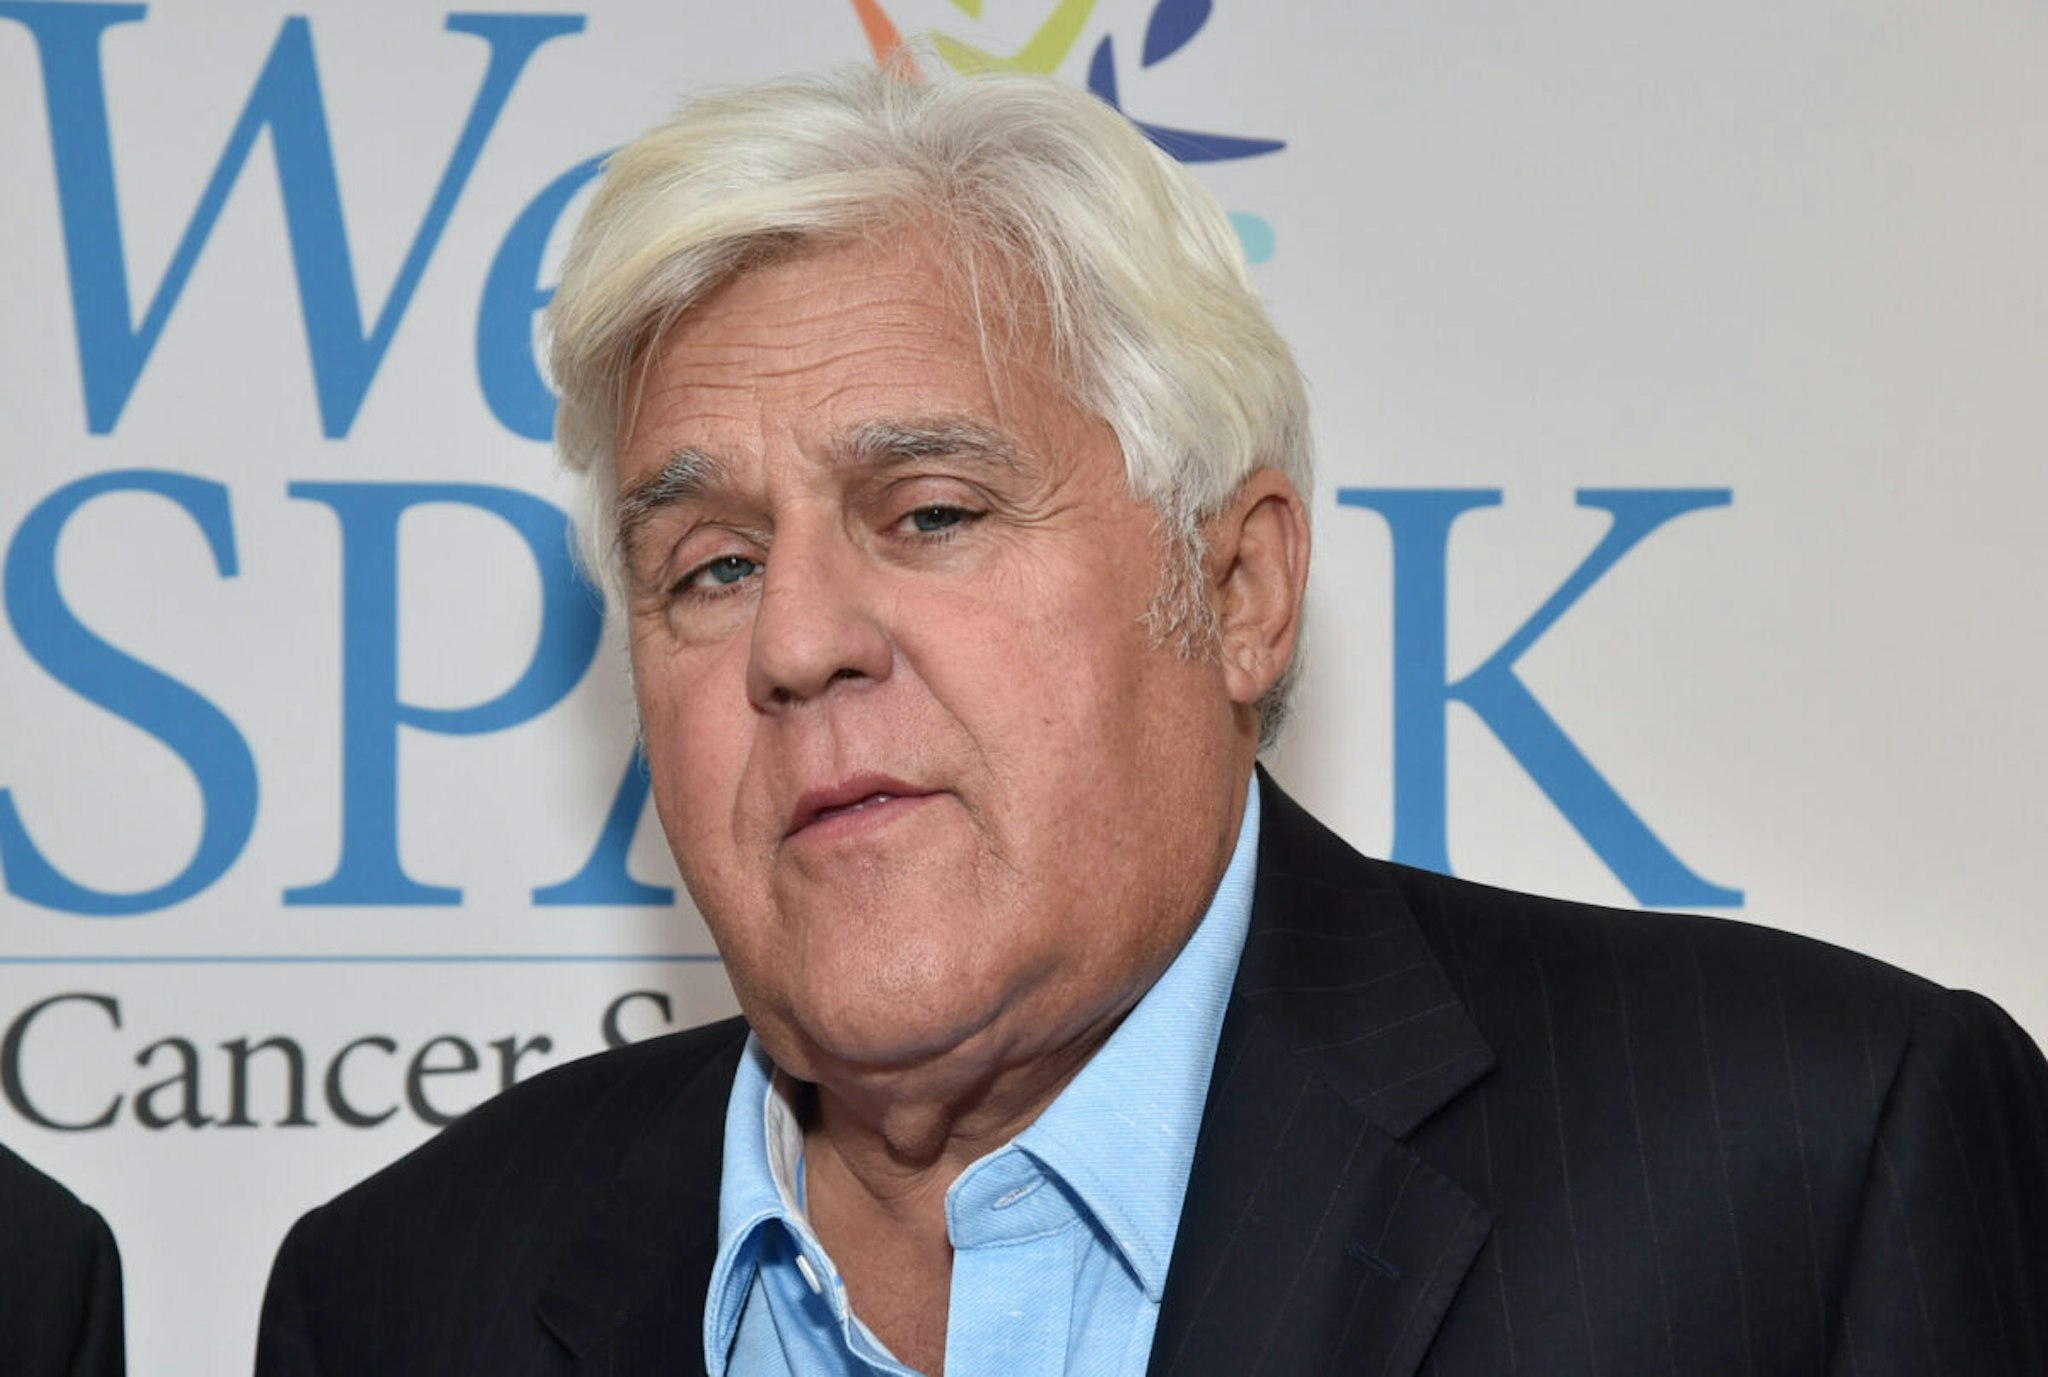 Jay Leno attends "May Contain Nuts! A Night Of Comedy" Benefiting WeSPARK Cancer Support Center at Skirball Cultural Center on October 25, 2022 in Los Angeles, California